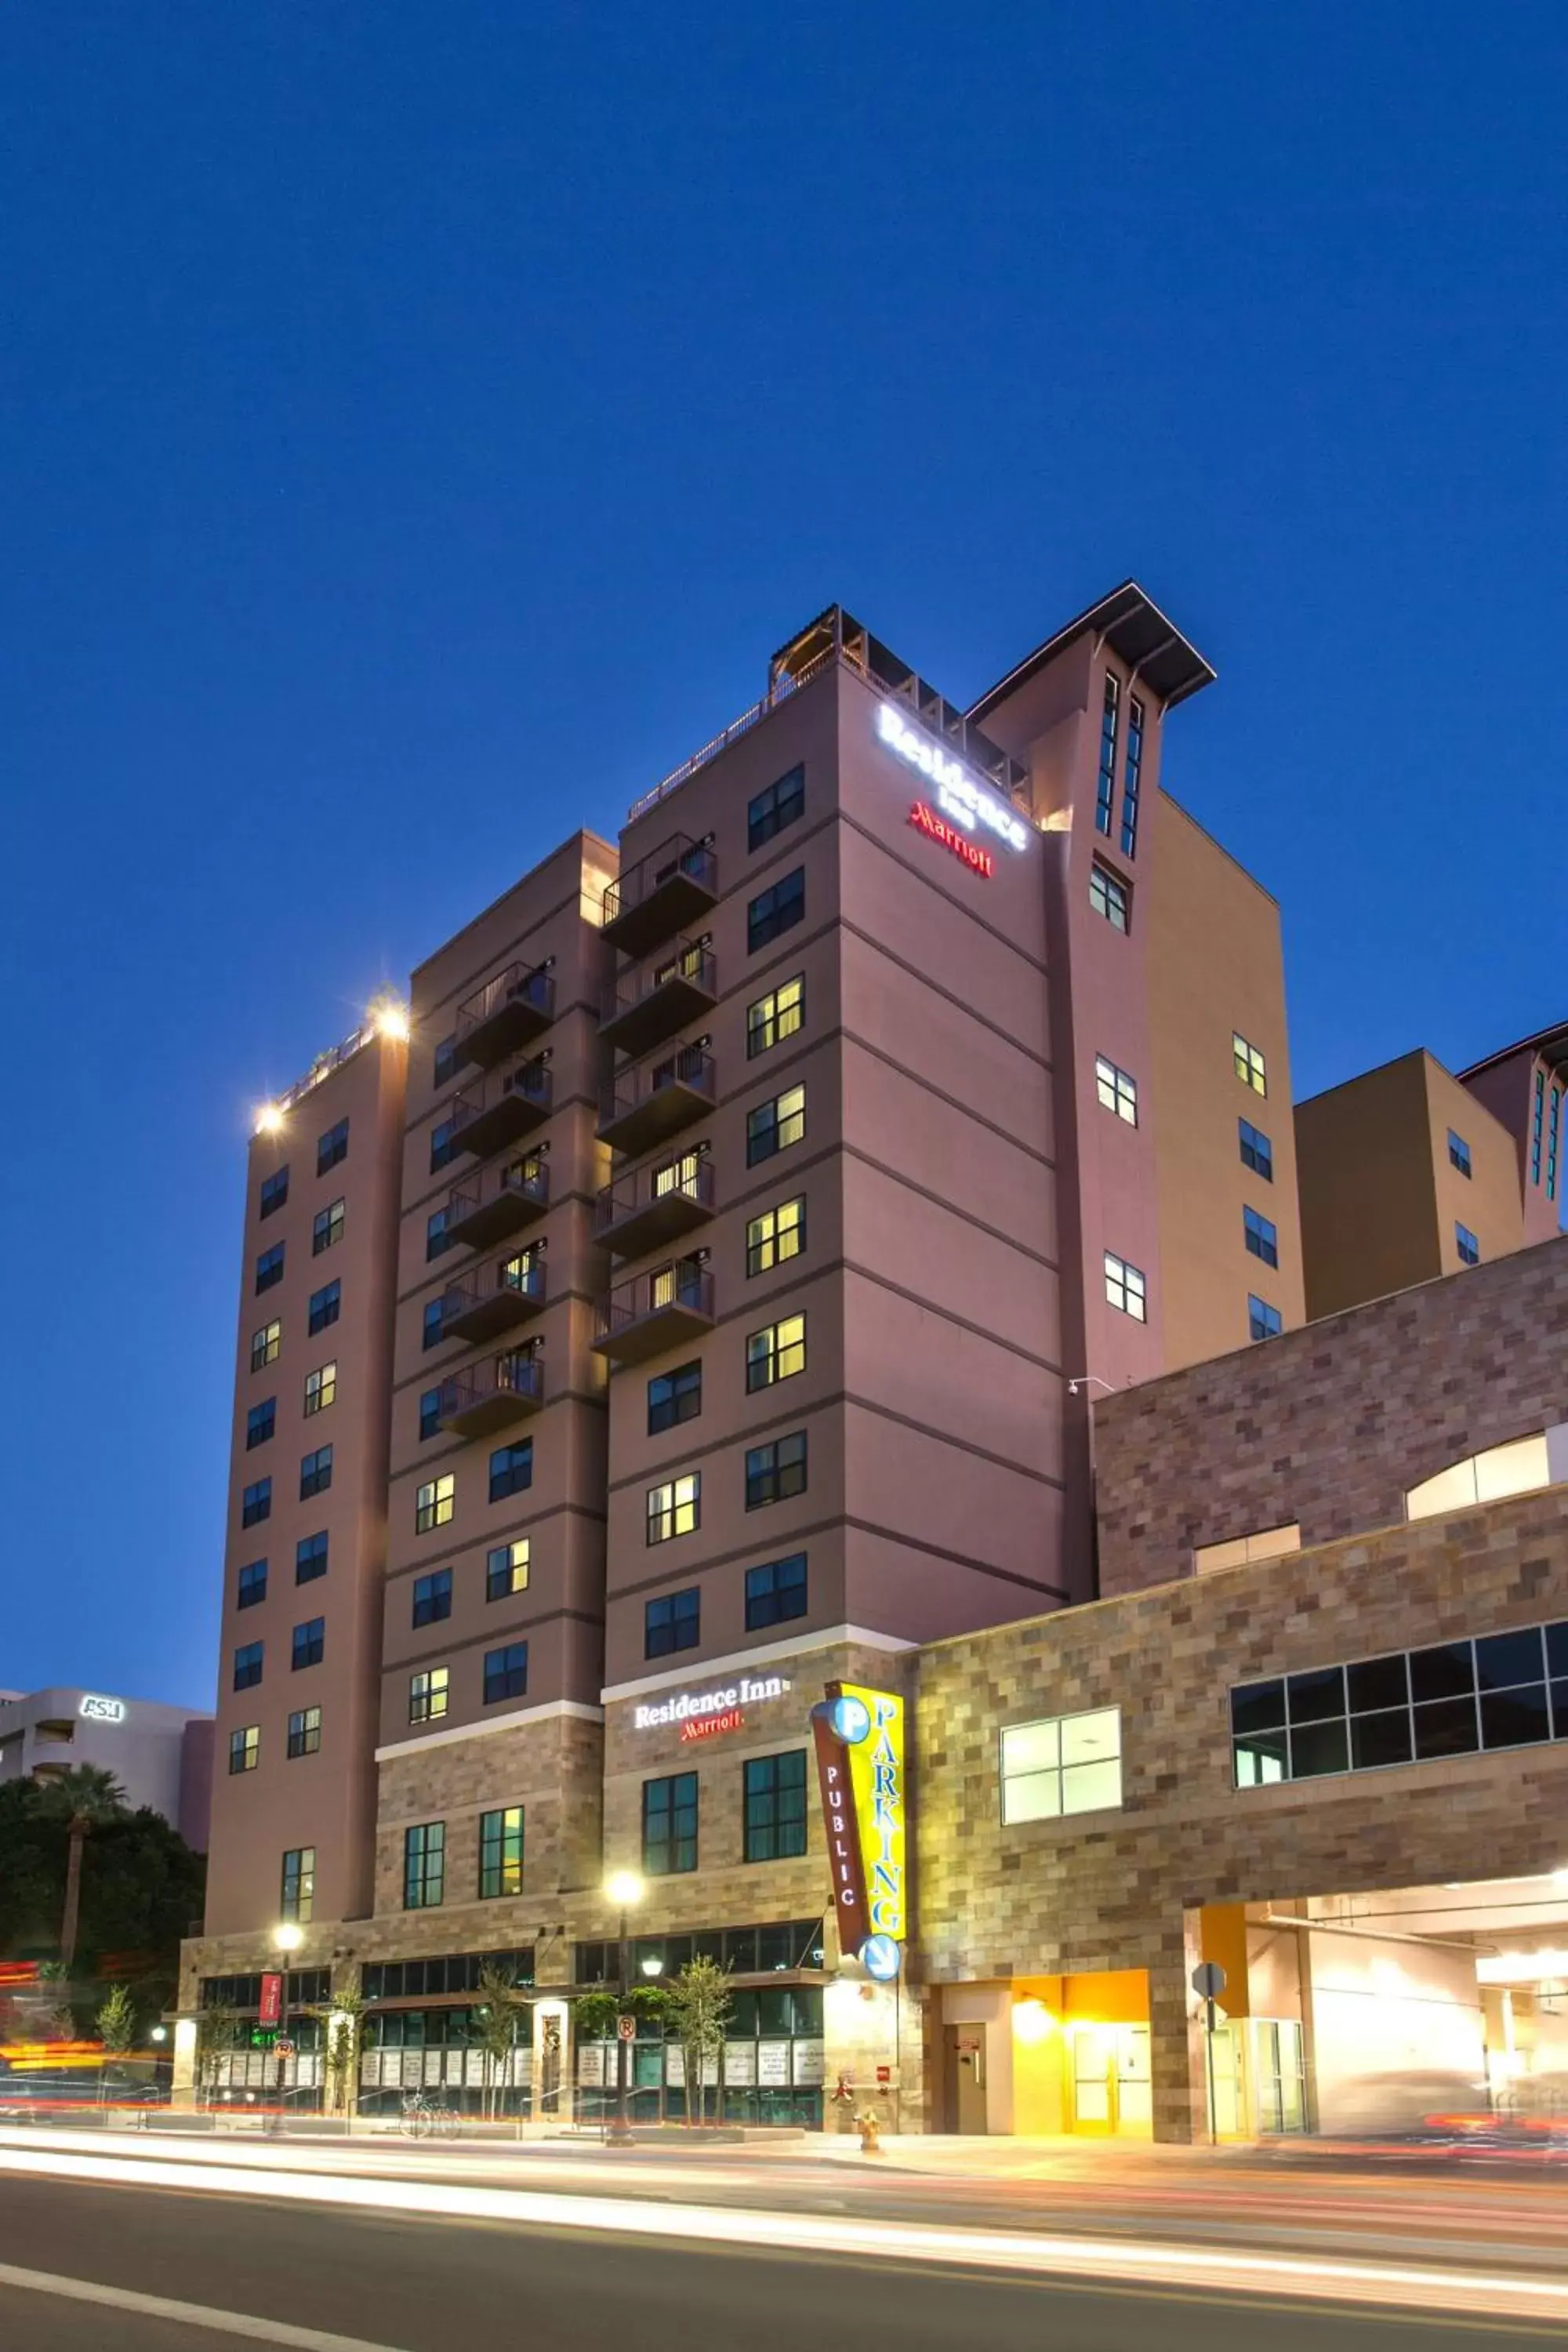 Property Building in Residence Inn by Marriott Tempe Downtown/University